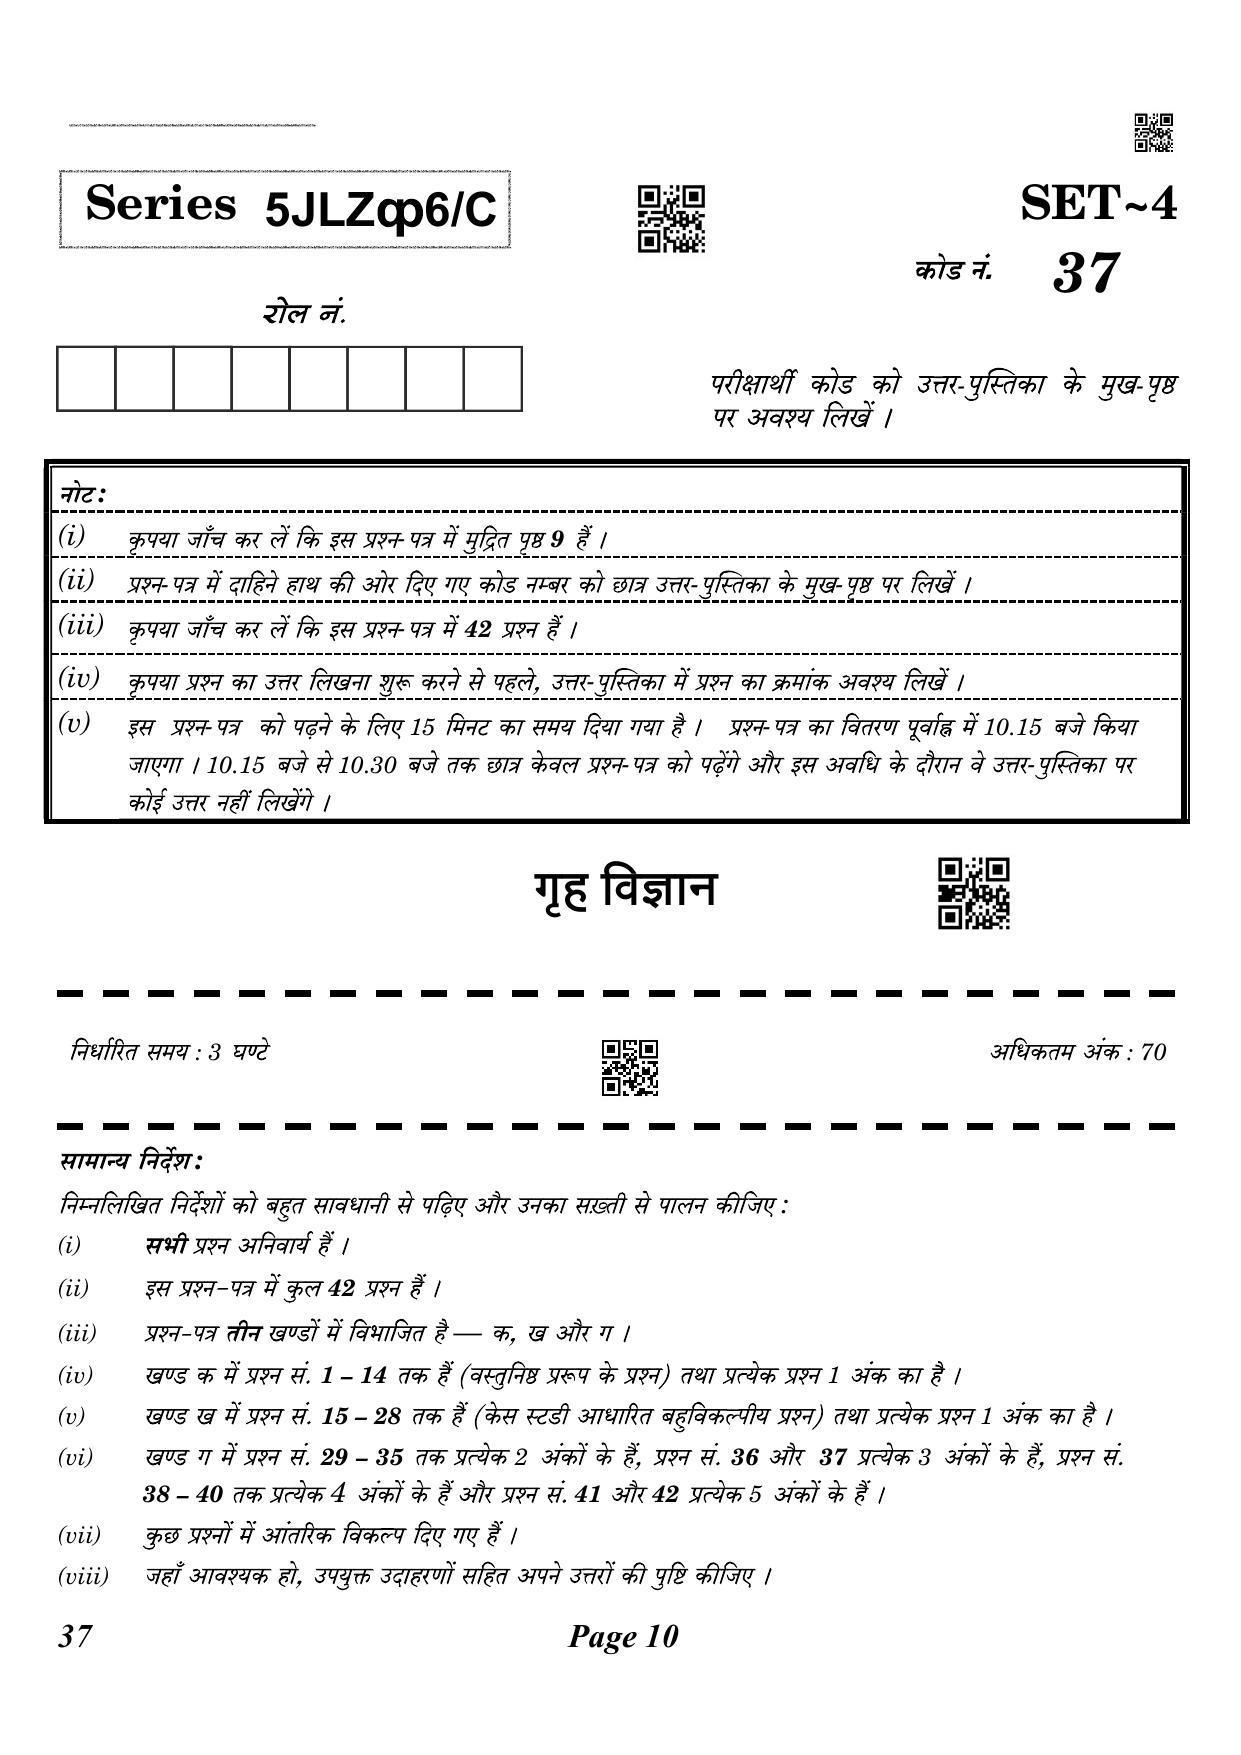 CBSE Class 10 QP_064_Home_Science 2021 Compartment Question Paper - Page 10